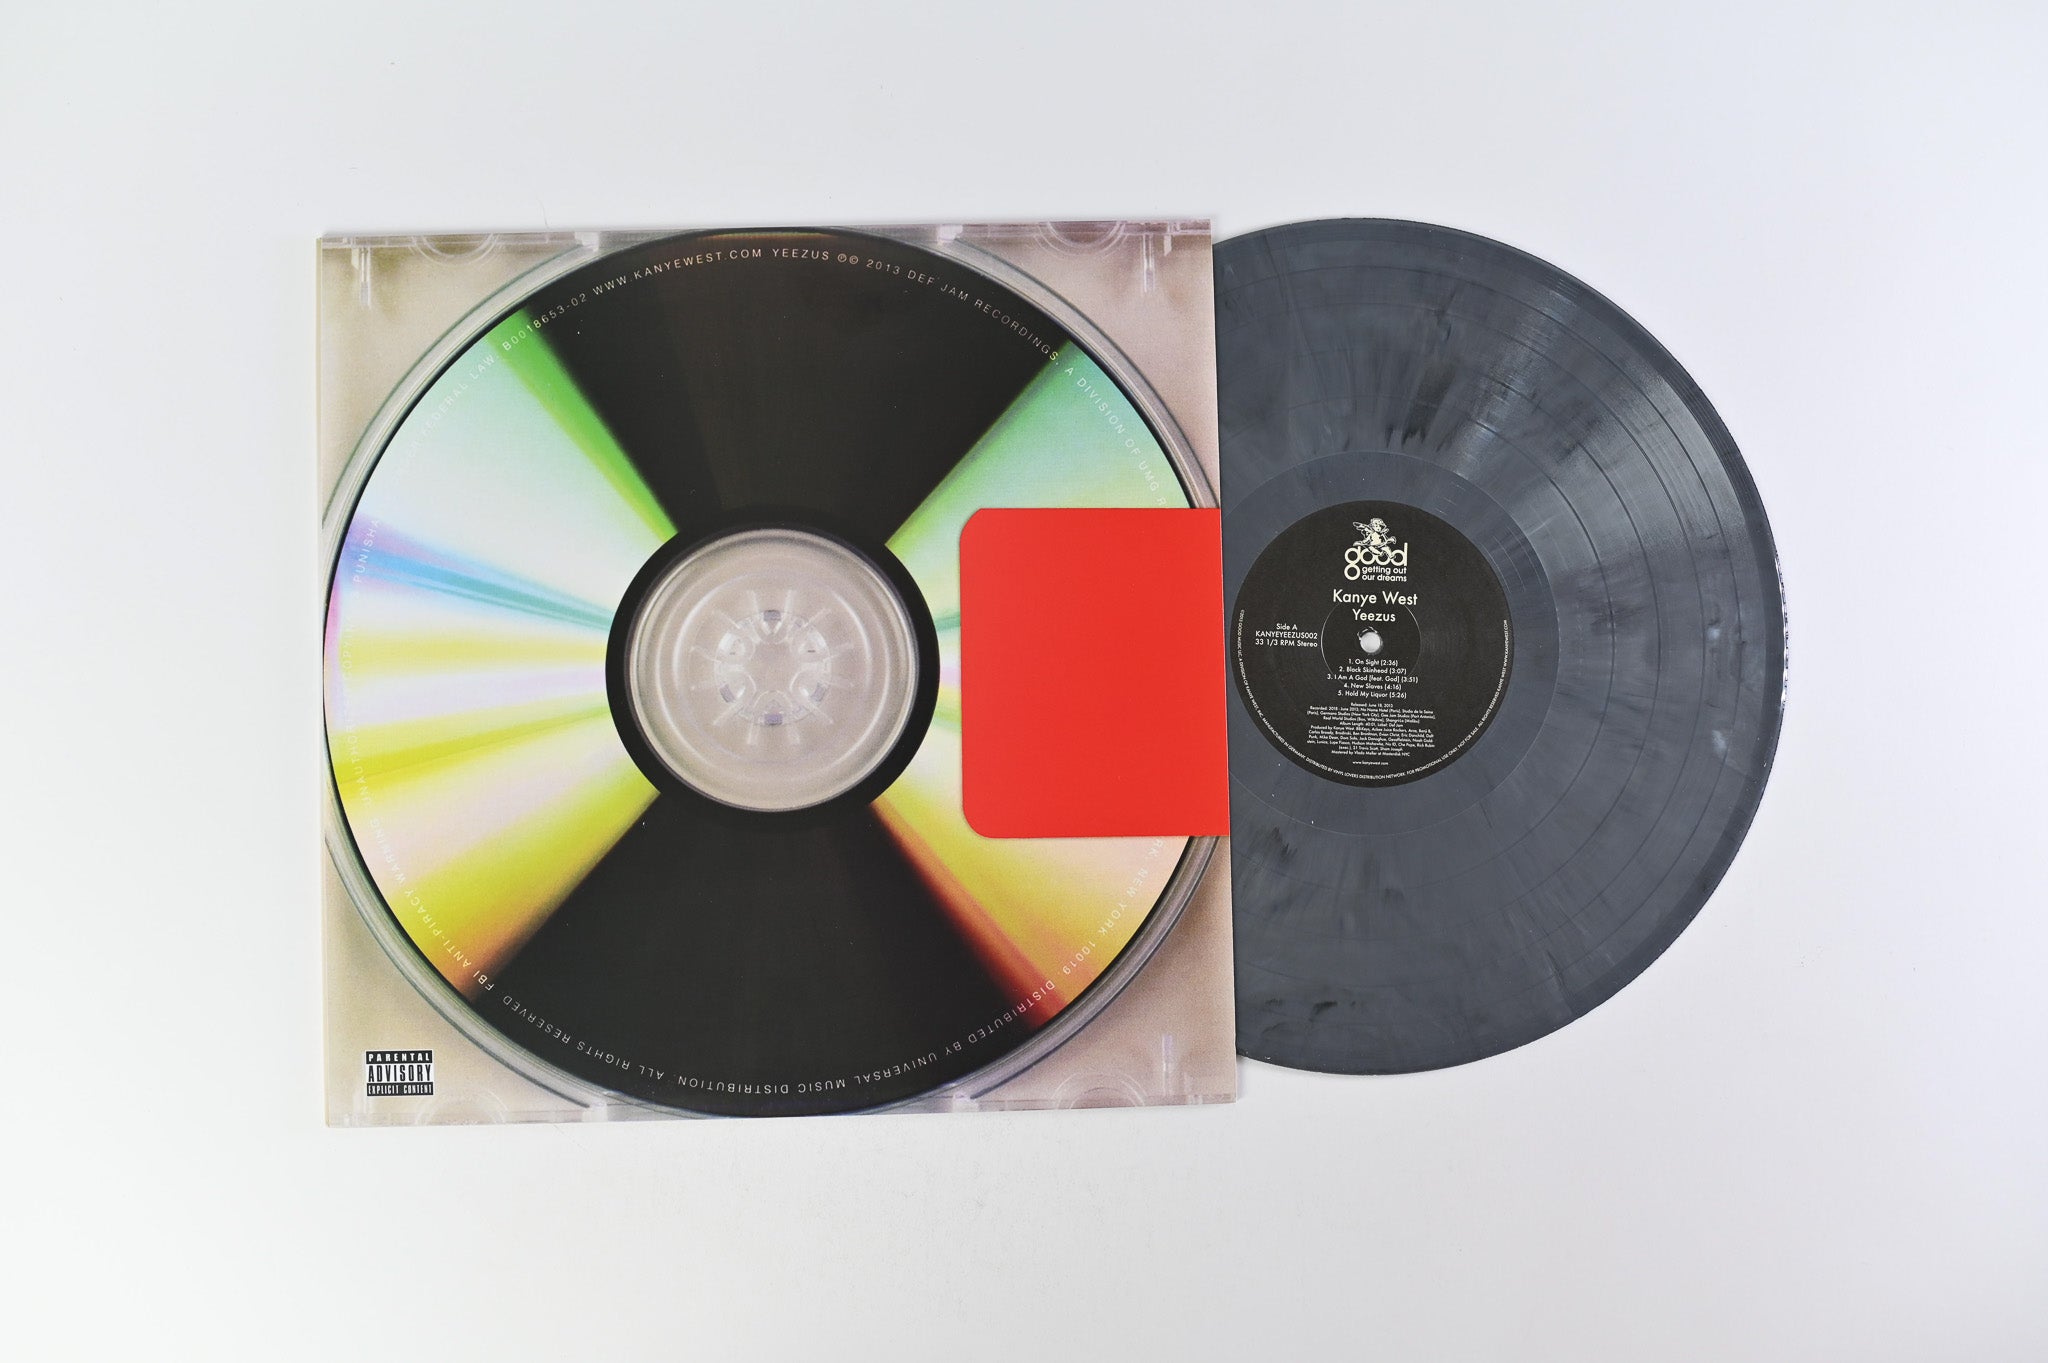 Kanye West - Yeezus on Getting Out Our Dreams Unofficial Release